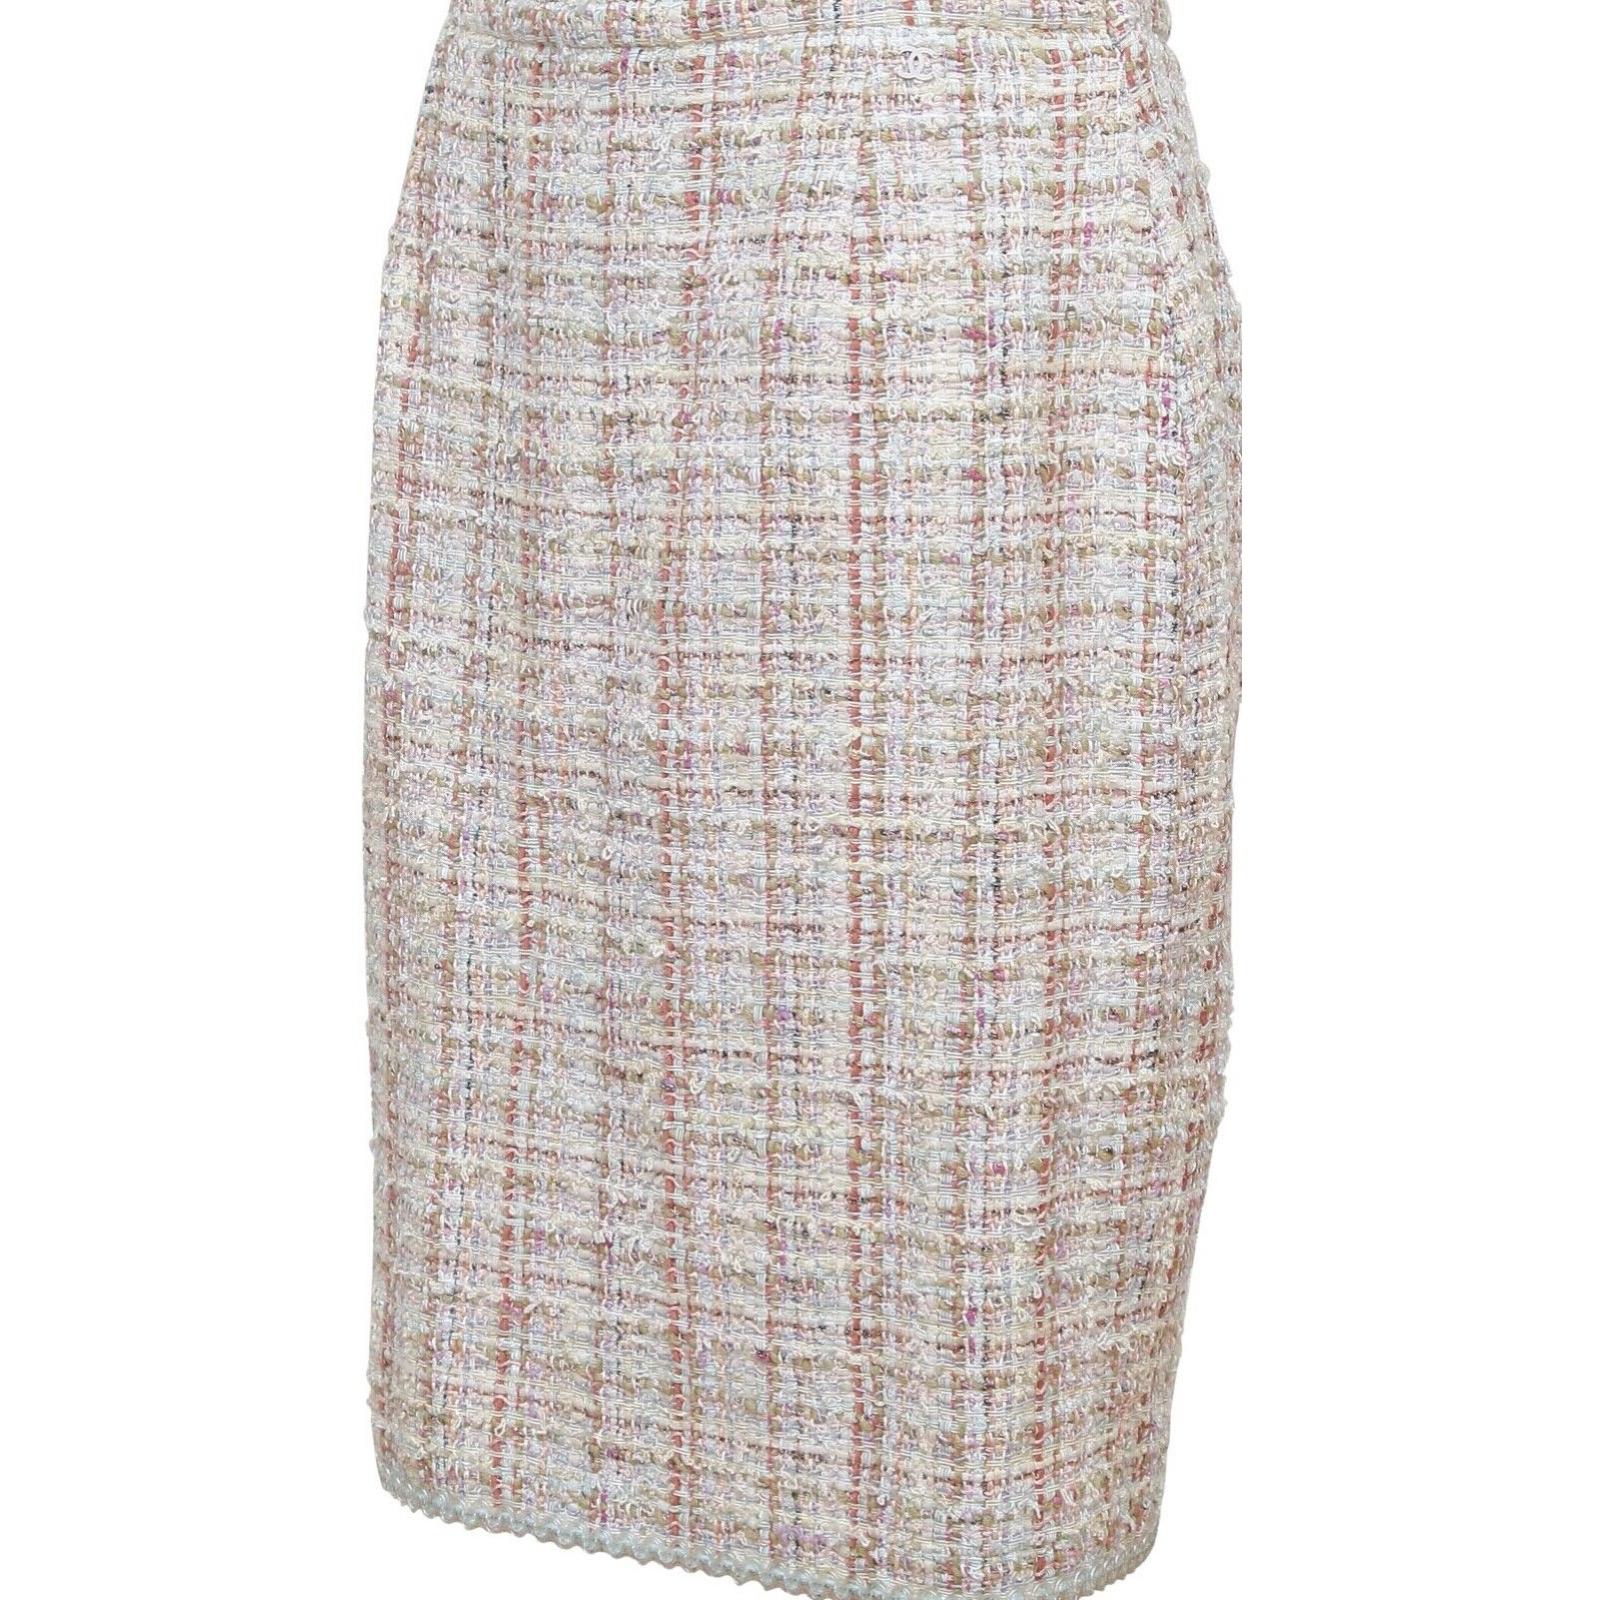 CHANEL Tweed Skirt Fantasy Multi-Color Camellia Cotton 2013 RUNWAY SZ 40 In Good Condition For Sale In Hollywood, FL